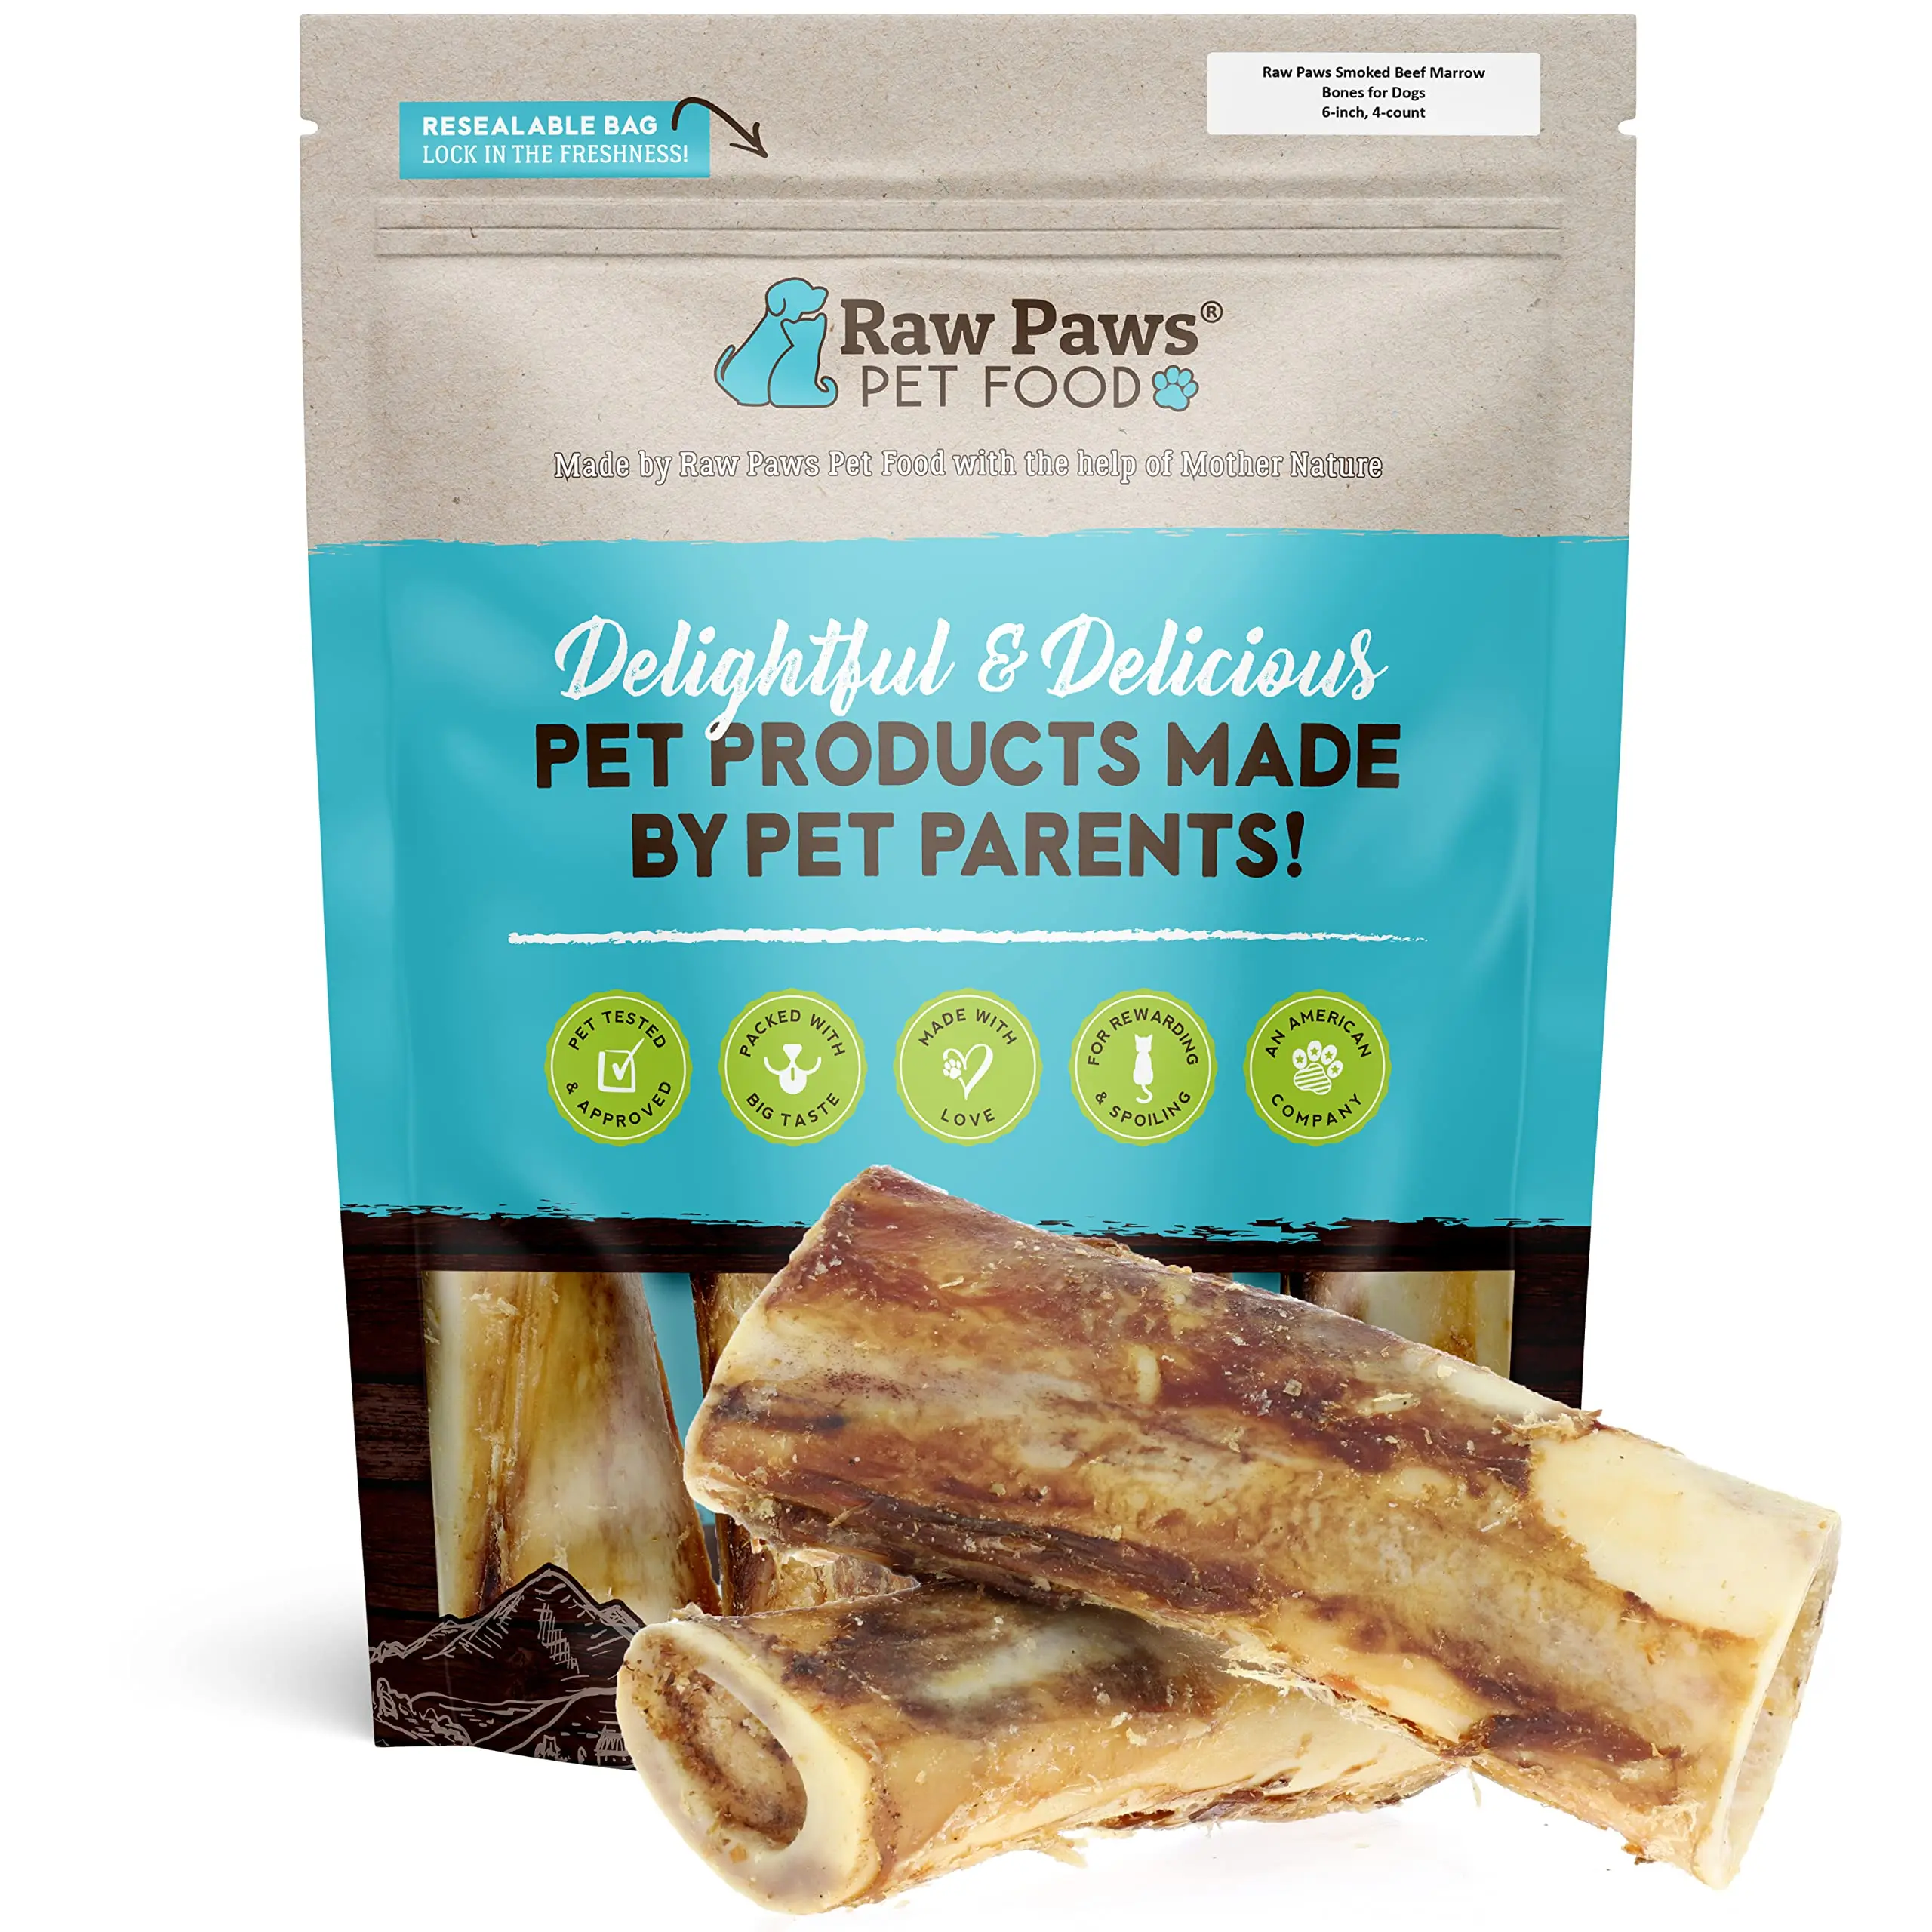 smoked beef bones for dogs - Are smoked beef bones good for dogs